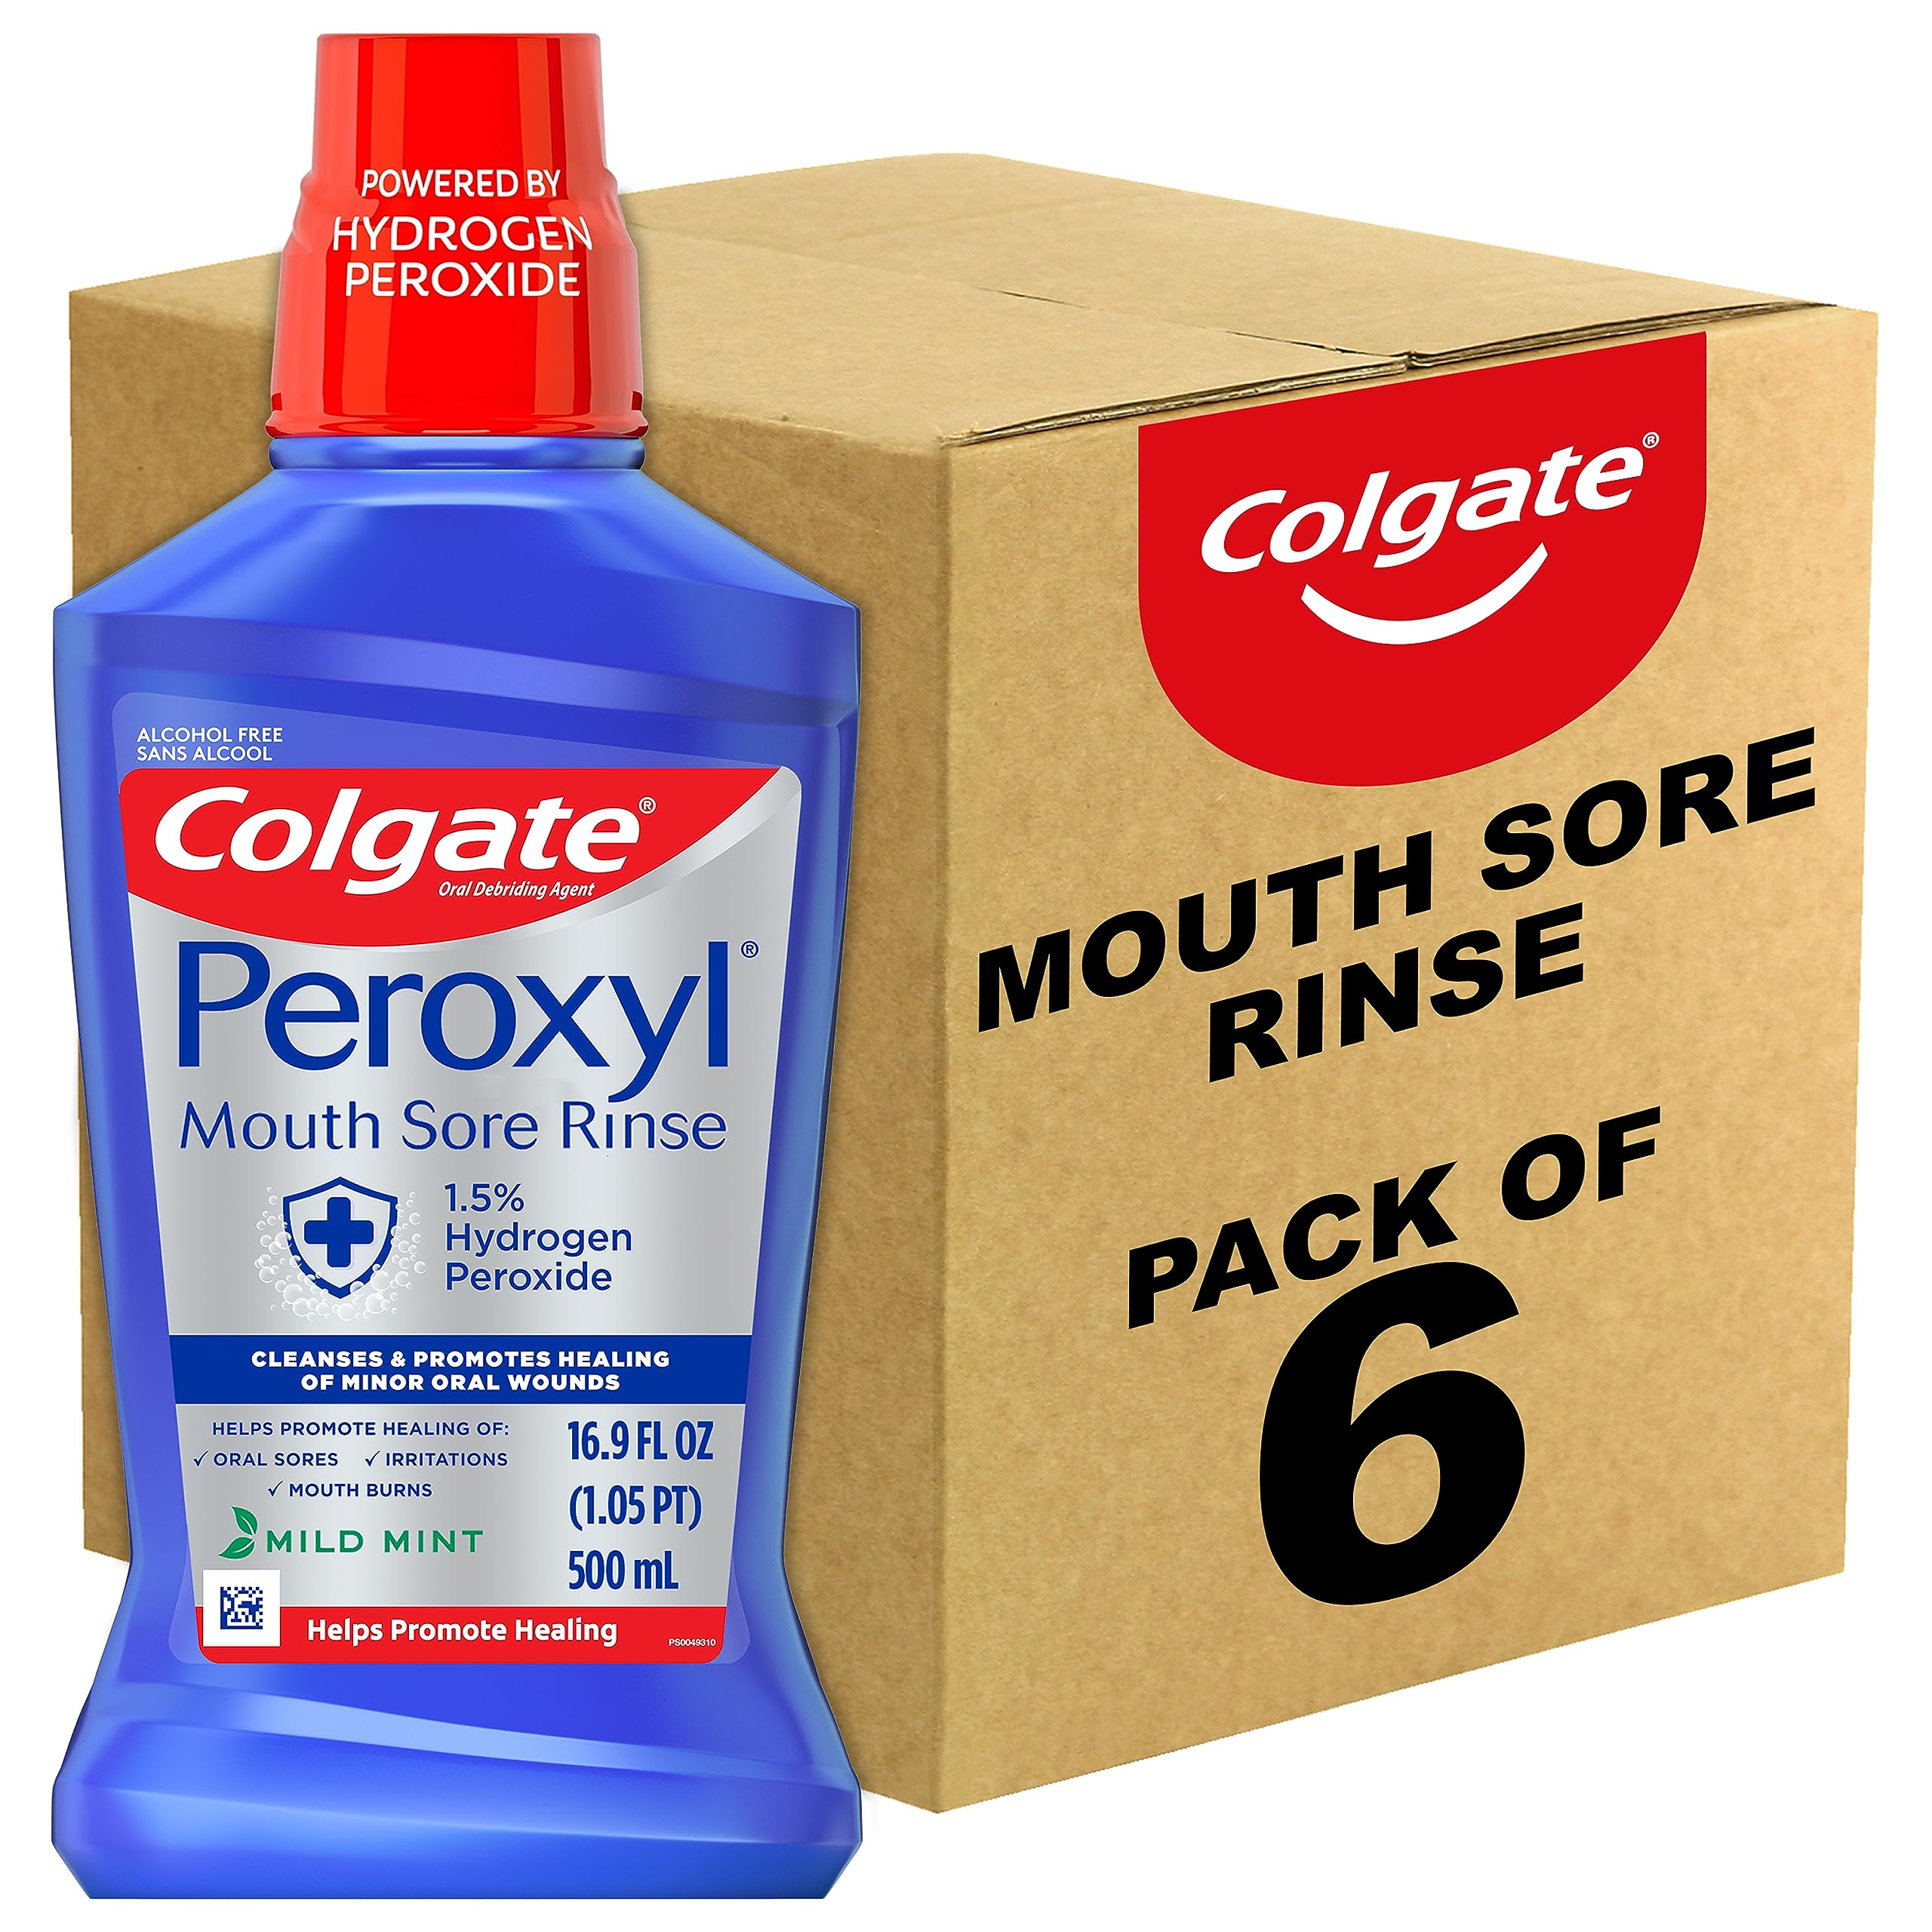 Colgate Peroxyl Antiseptic Mouthwash and Mouth Sore Rinse, 1.5% Hydrogen Peroxide, Mild Mint - 500ml, 16.9 Fluid Ounces (Pack of 6)